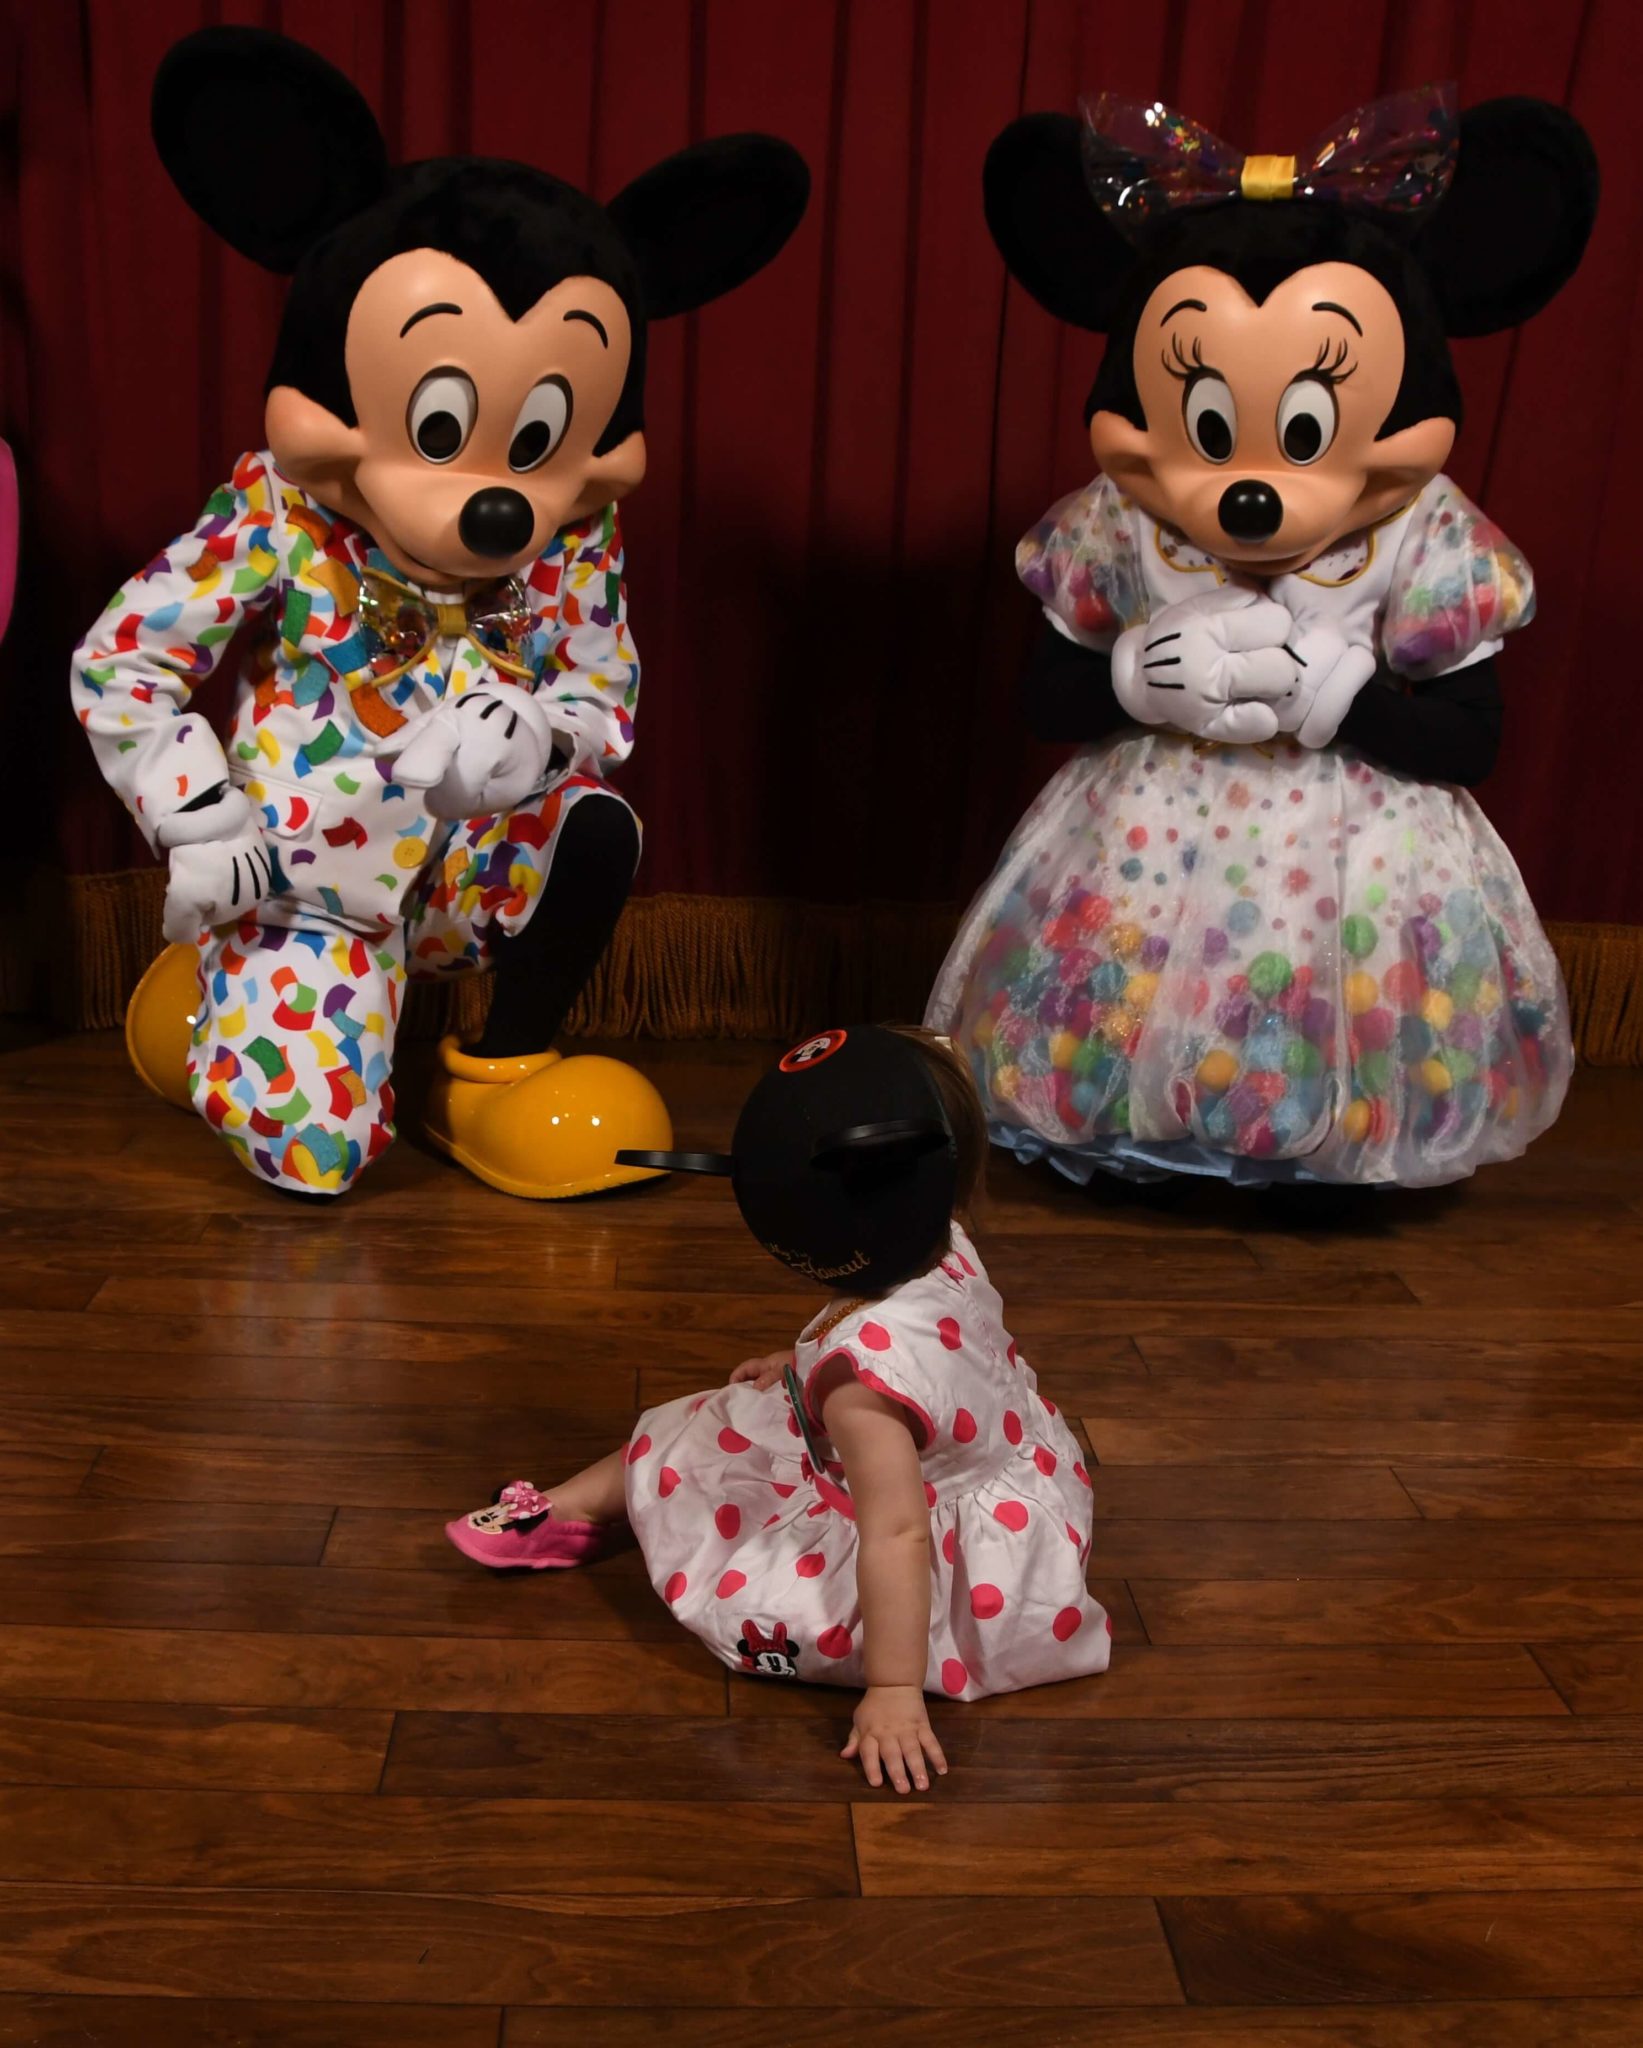 Mickey Mouse and Minnie Mouse Birthday Celebration at Magic Kingdom Disney World With a 1 Year Old